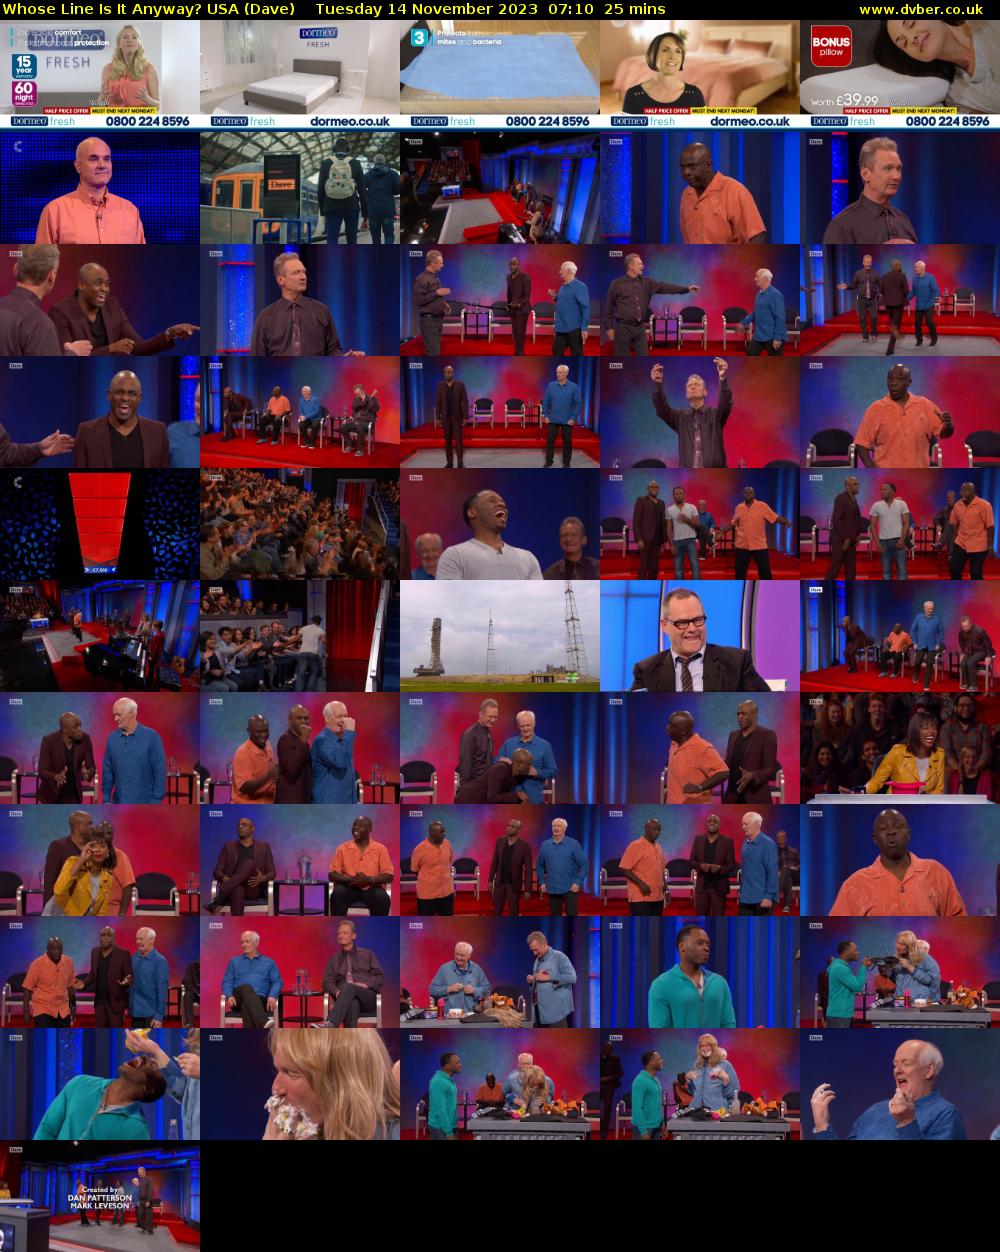 Whose Line Is It Anyway? USA (Dave) Tuesday 14 November 2023 07:10 - 07:35